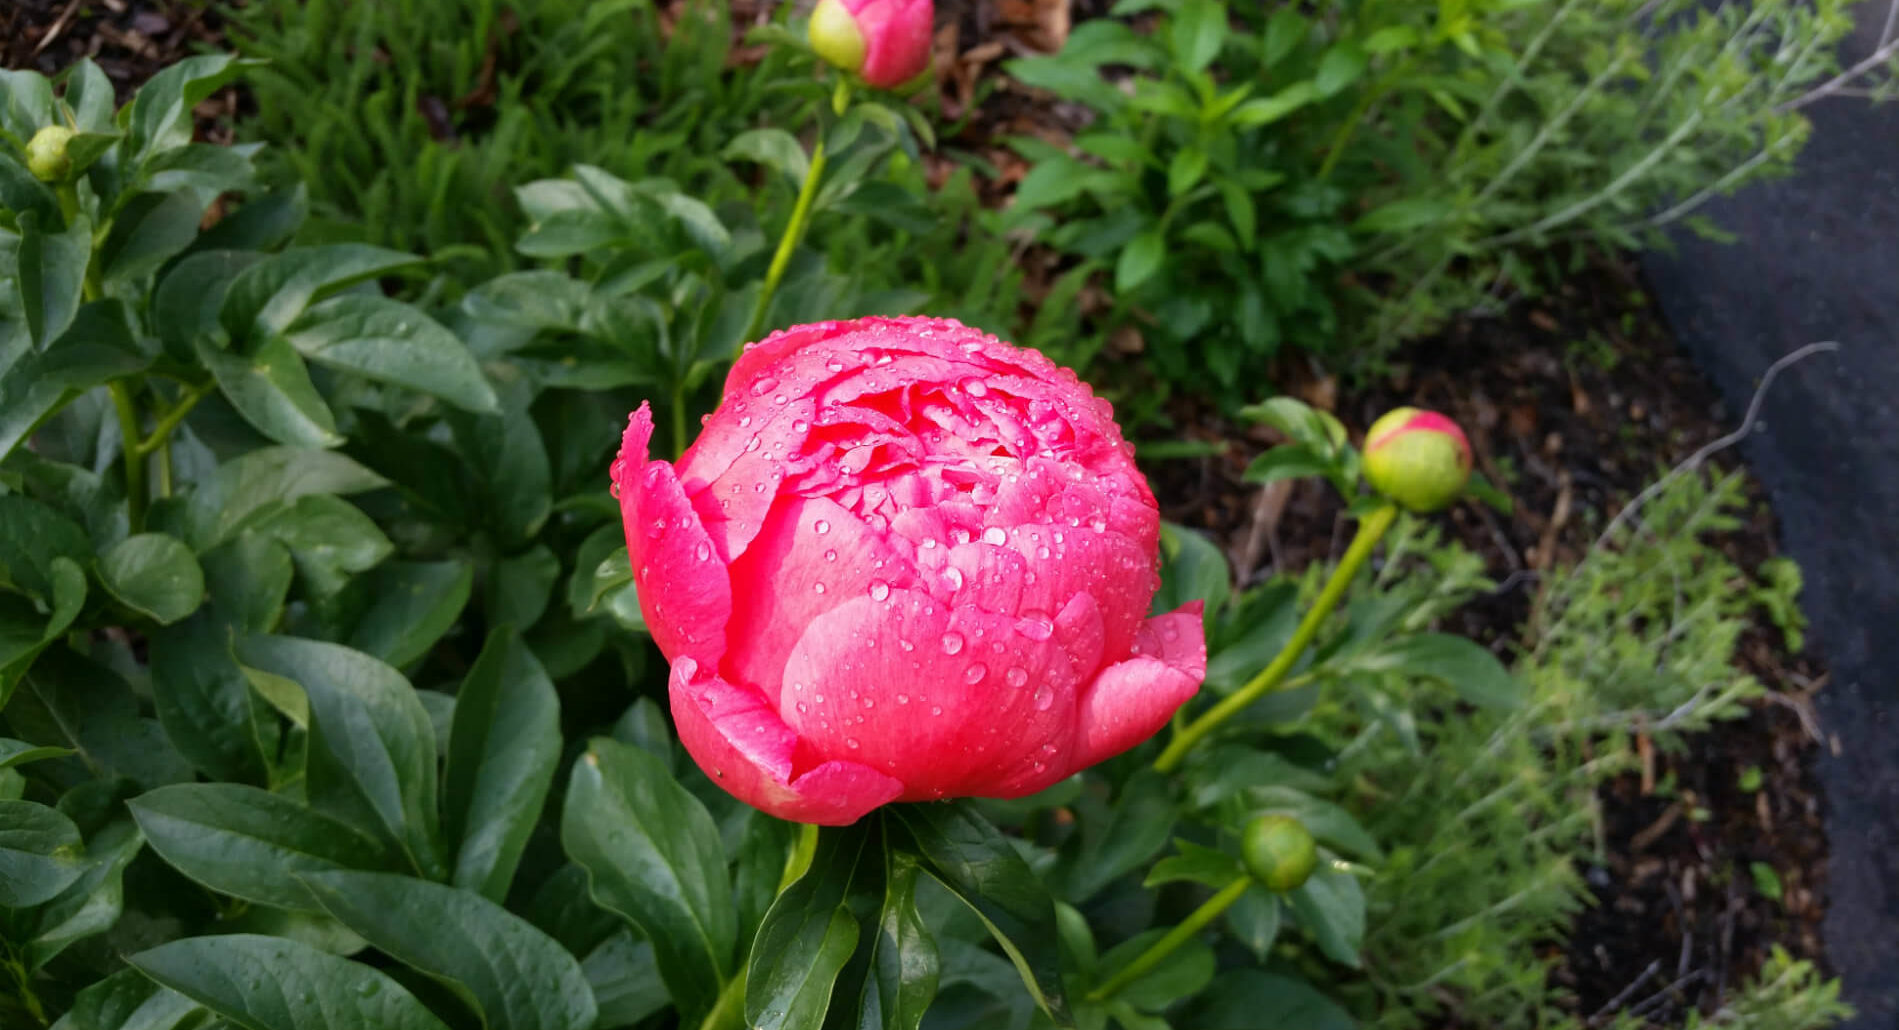 Bright pink flower covered in dew drops surrounded by green leaves